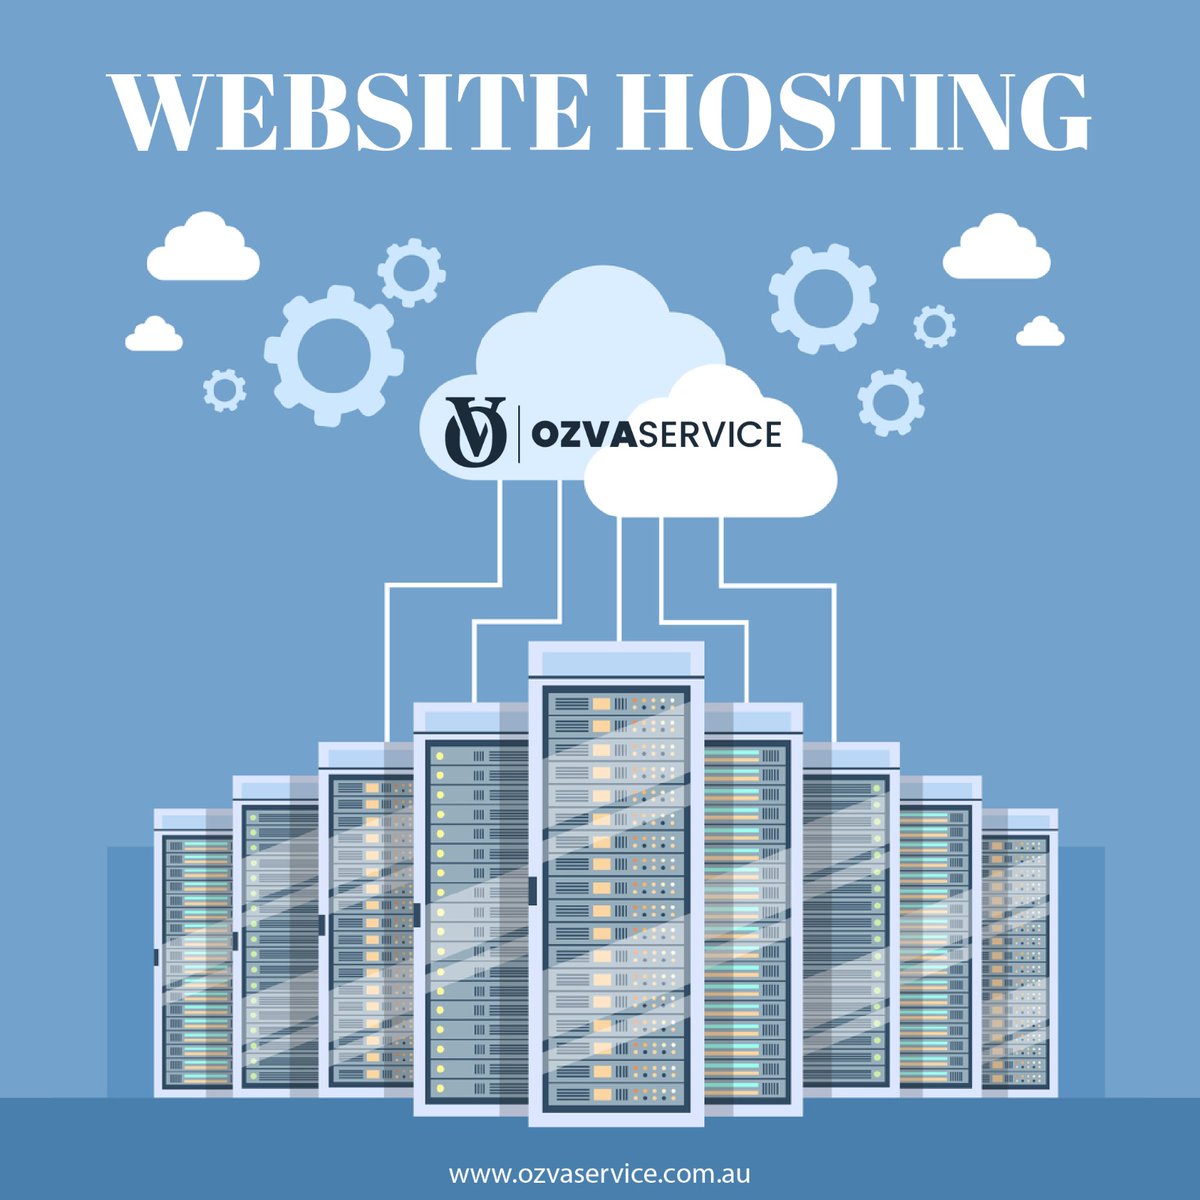 Reliable hosting for your digital presence. Elevate your website's performance with our secure and scalable hosting solutions. Experience the difference today! 🌐💻
.
.
#websitehosting #ozvaservice #hostingservices